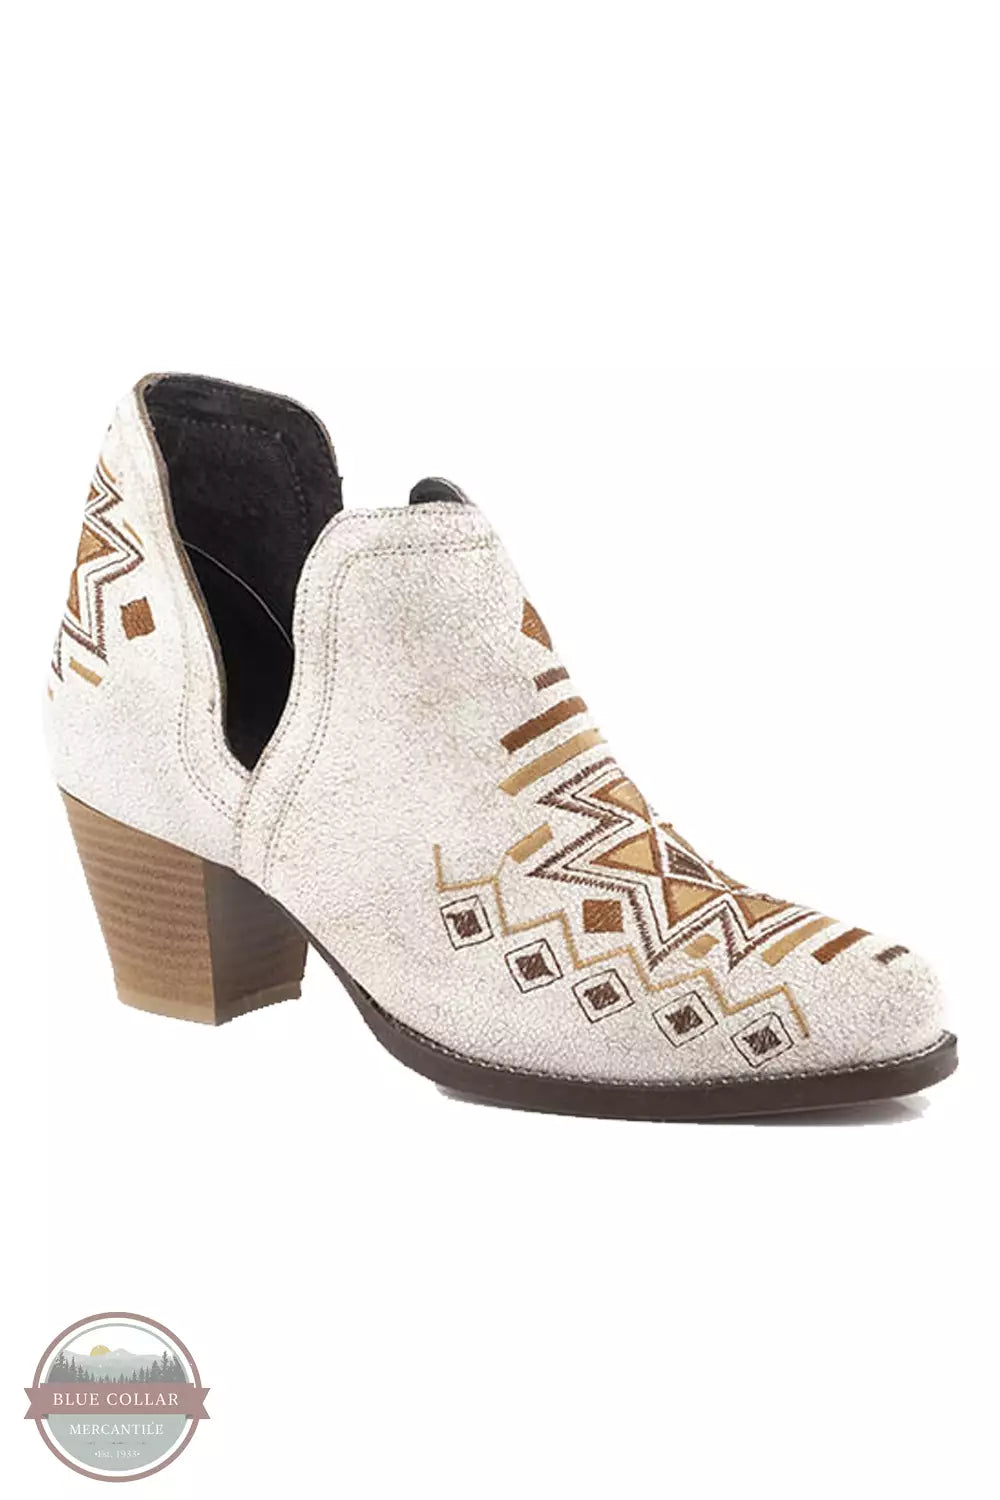 Roper 09-021-0981-3213 WH Rowdy Aztec Suede Snip Toe Shorty Western Boot in White Profile View